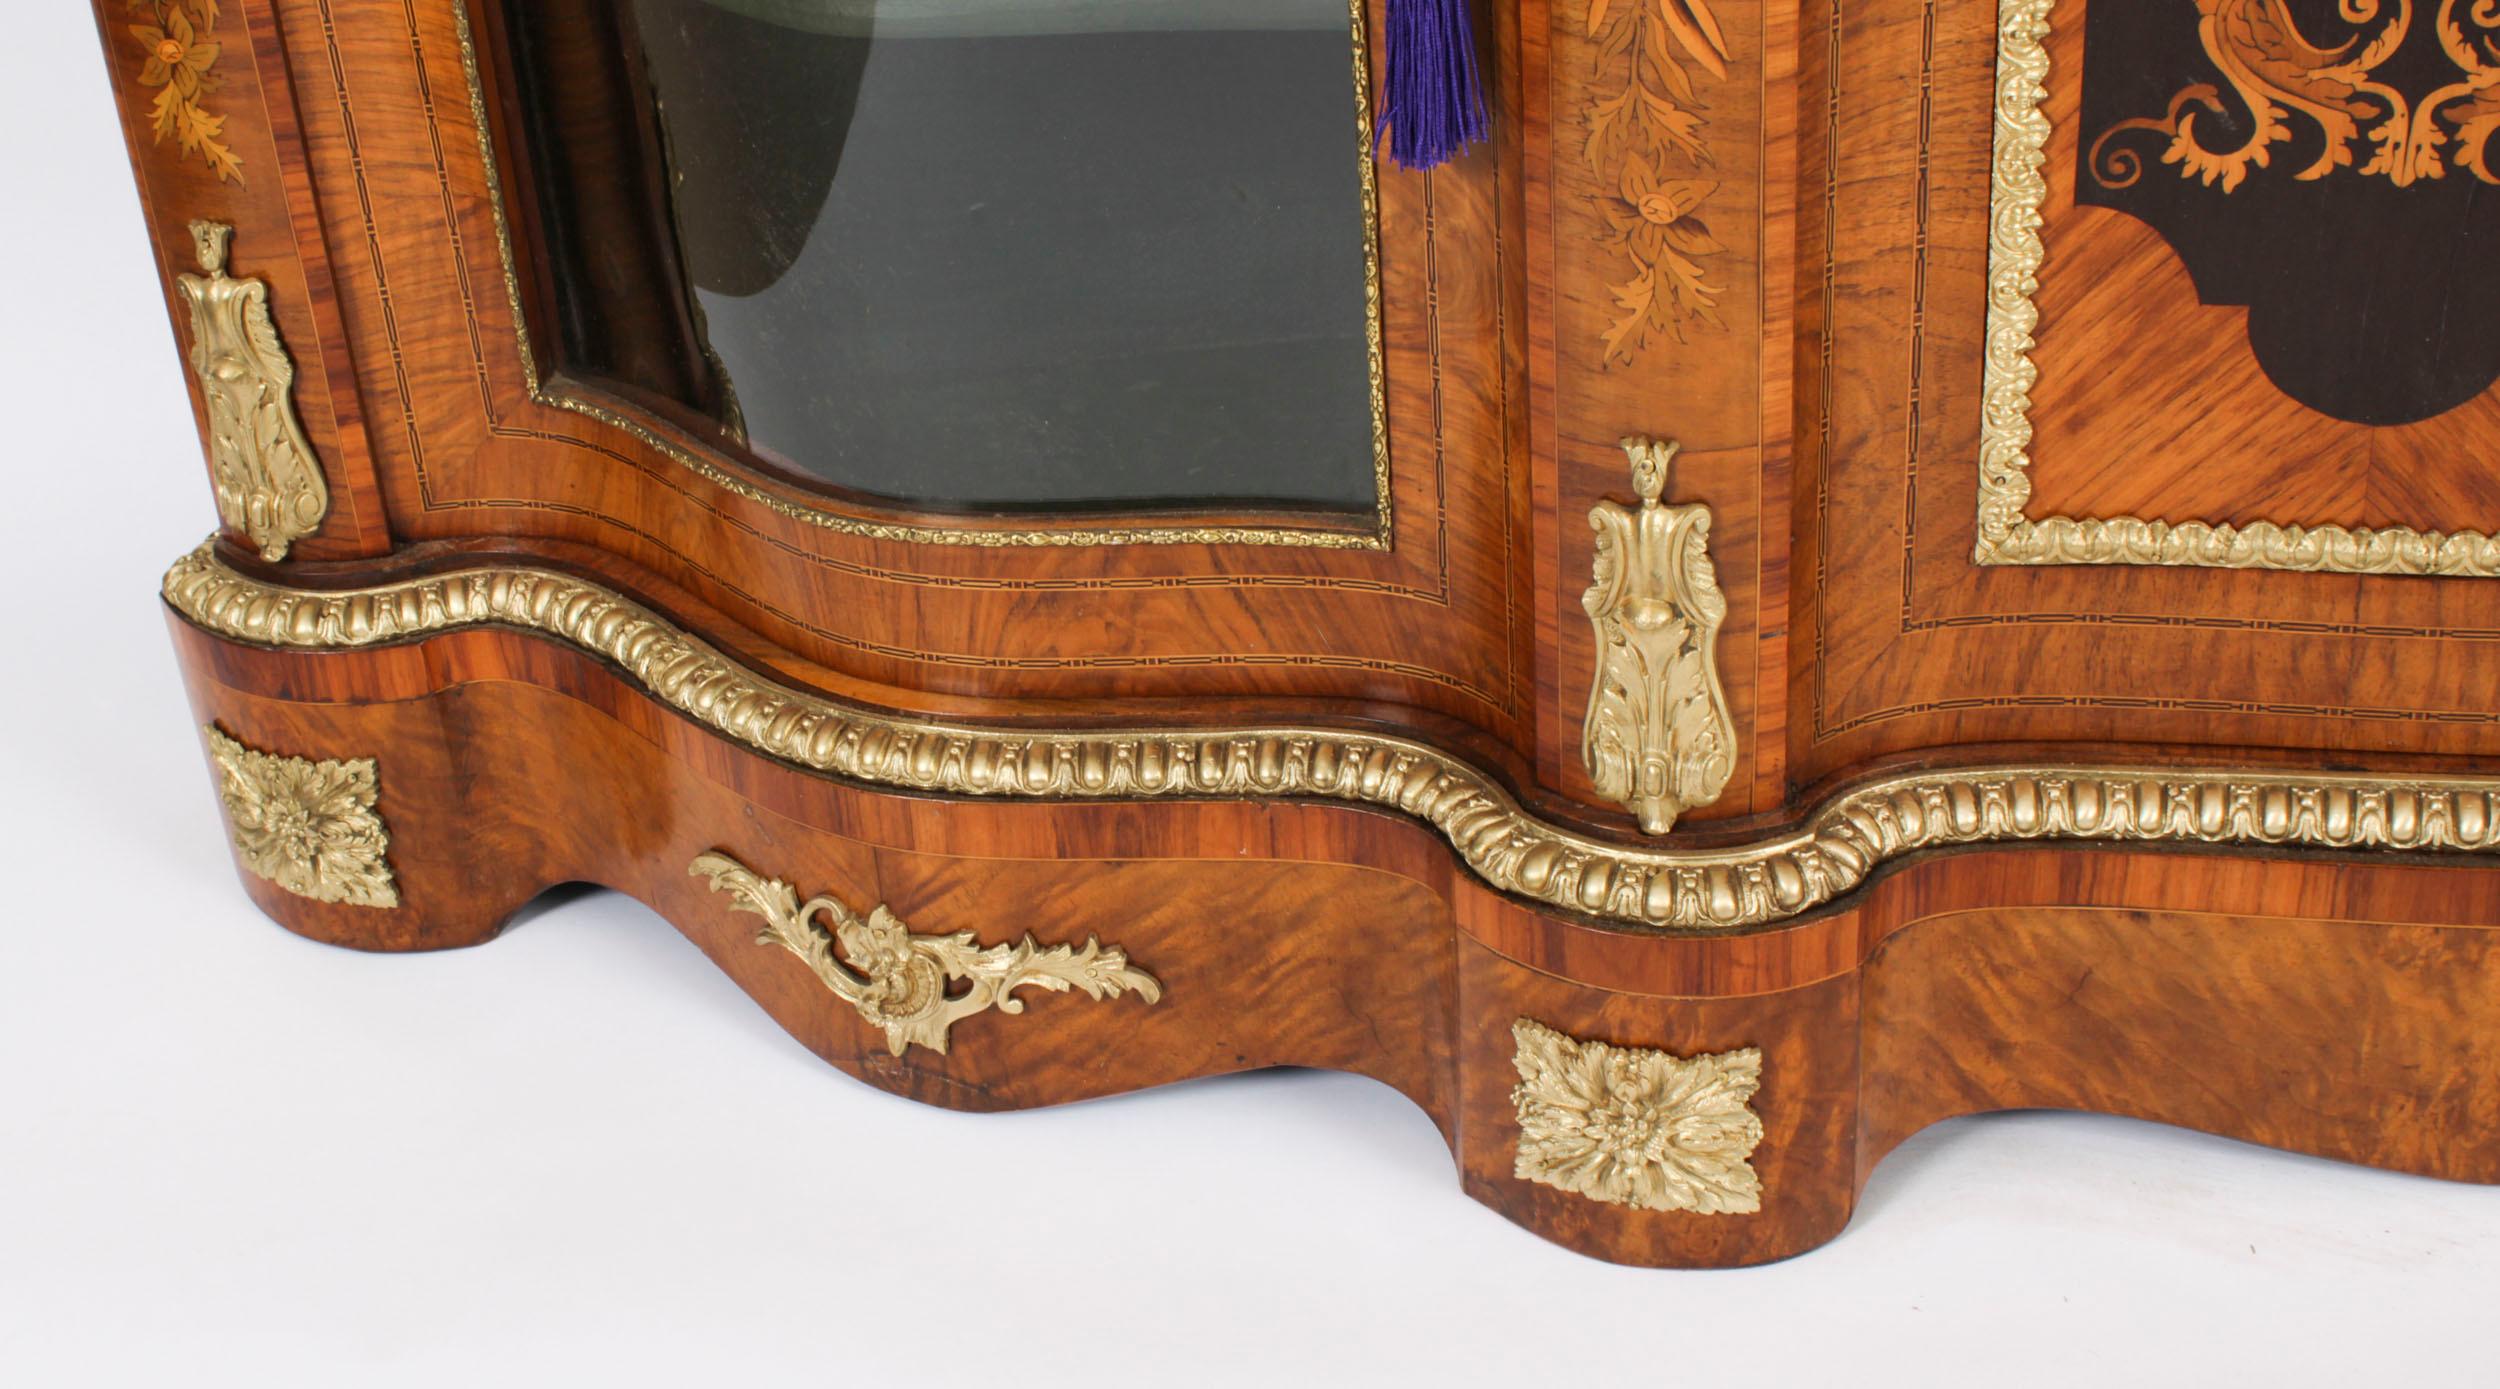 Antique Large Ormolu Mounted Walnut & Marquetry Serpentine Credenza 19th C For Sale 5